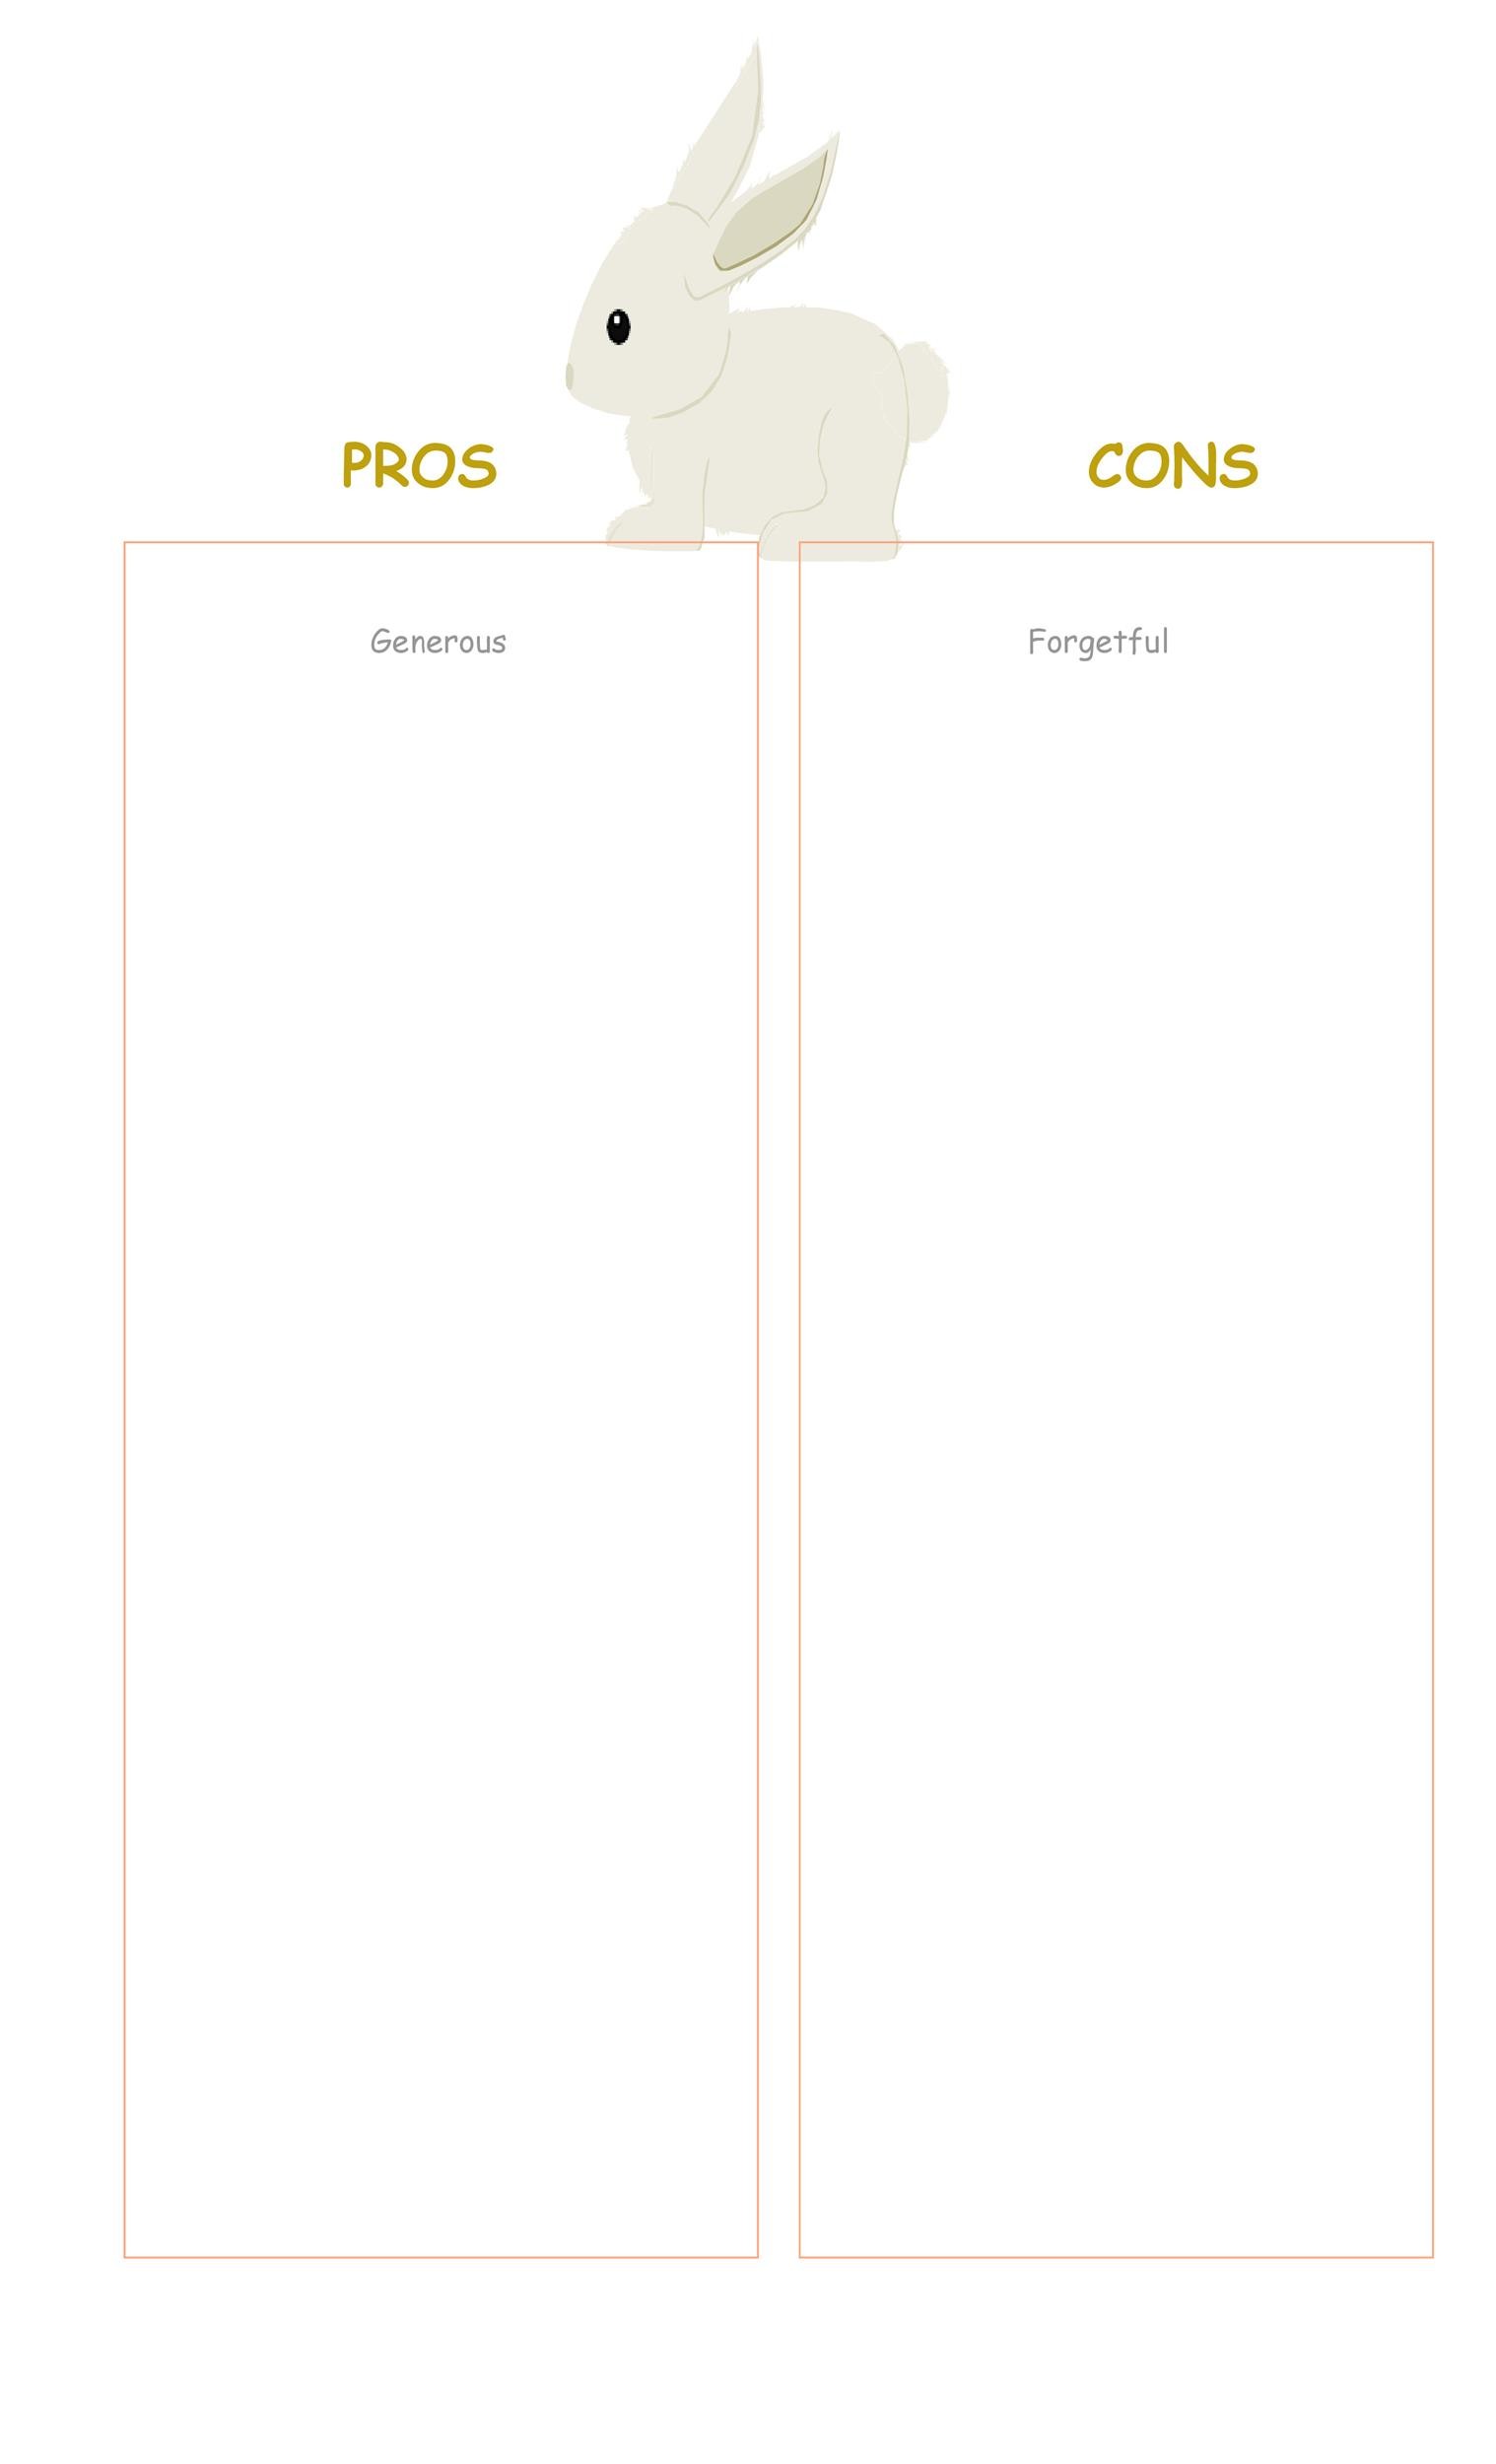 27 Printable Pros and Cons Lists / Charts / Templates ᐅ TemplateLab